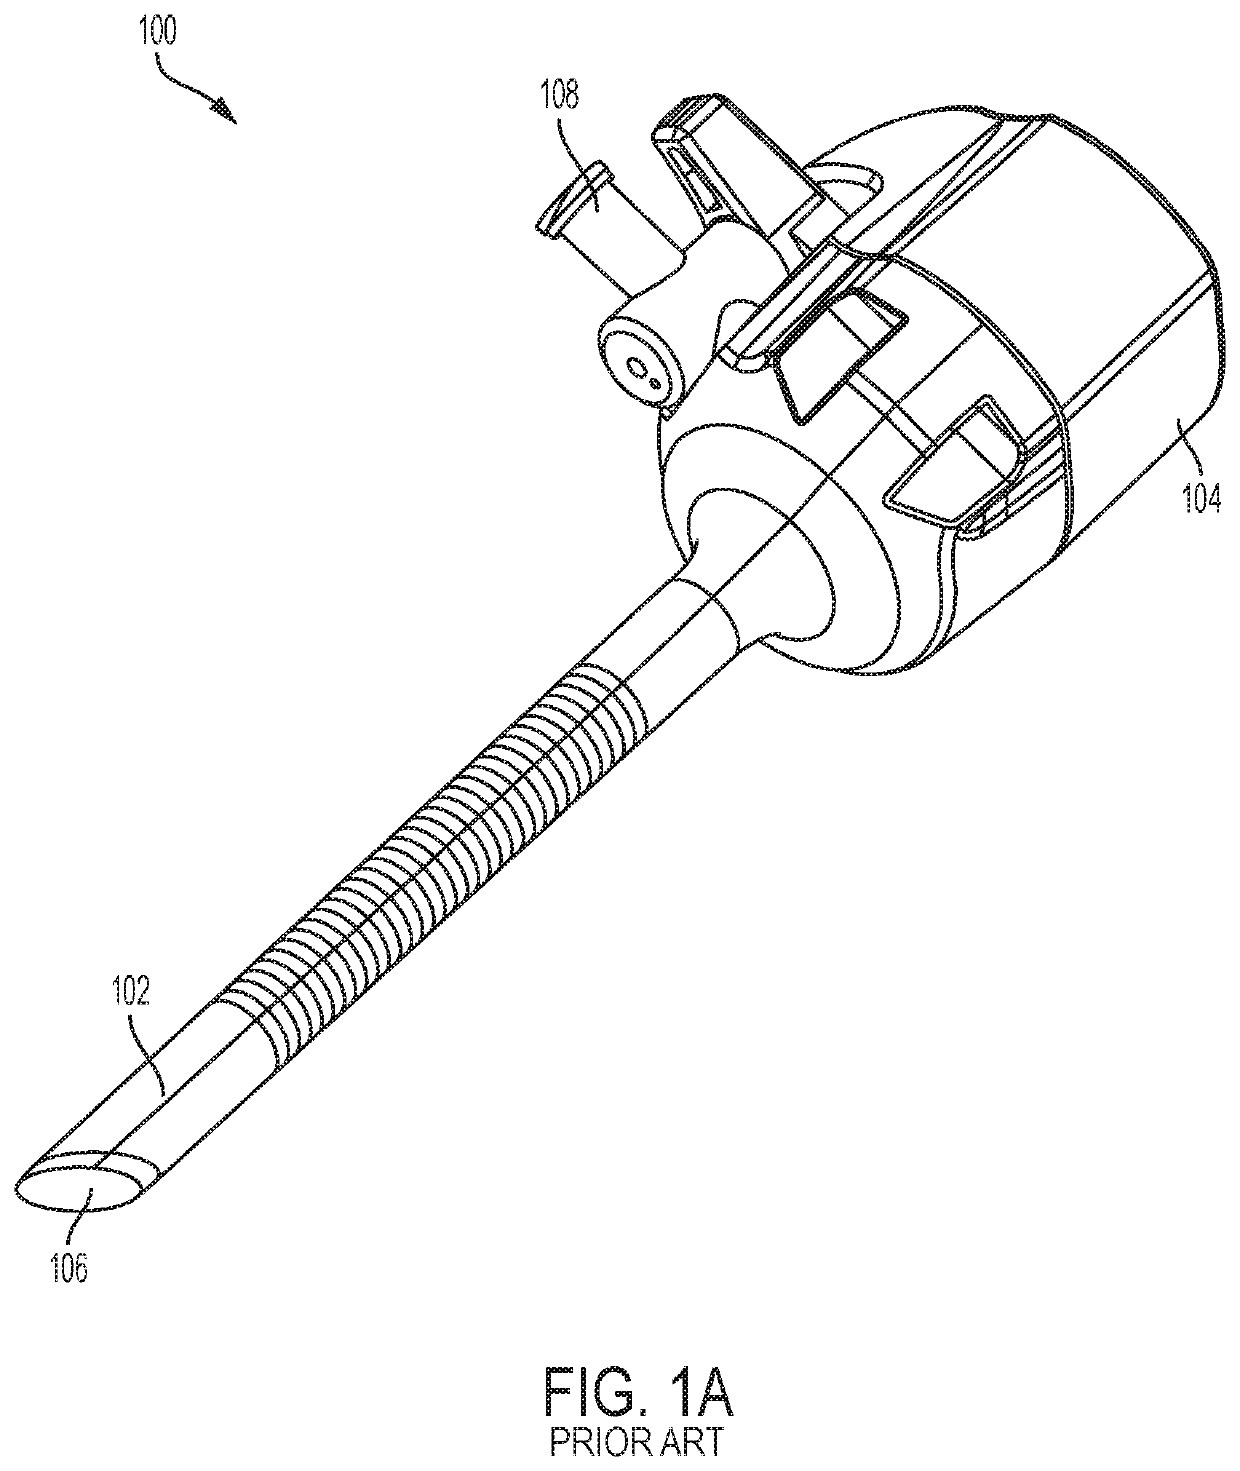 Surgical end effector loading device and trocar integration